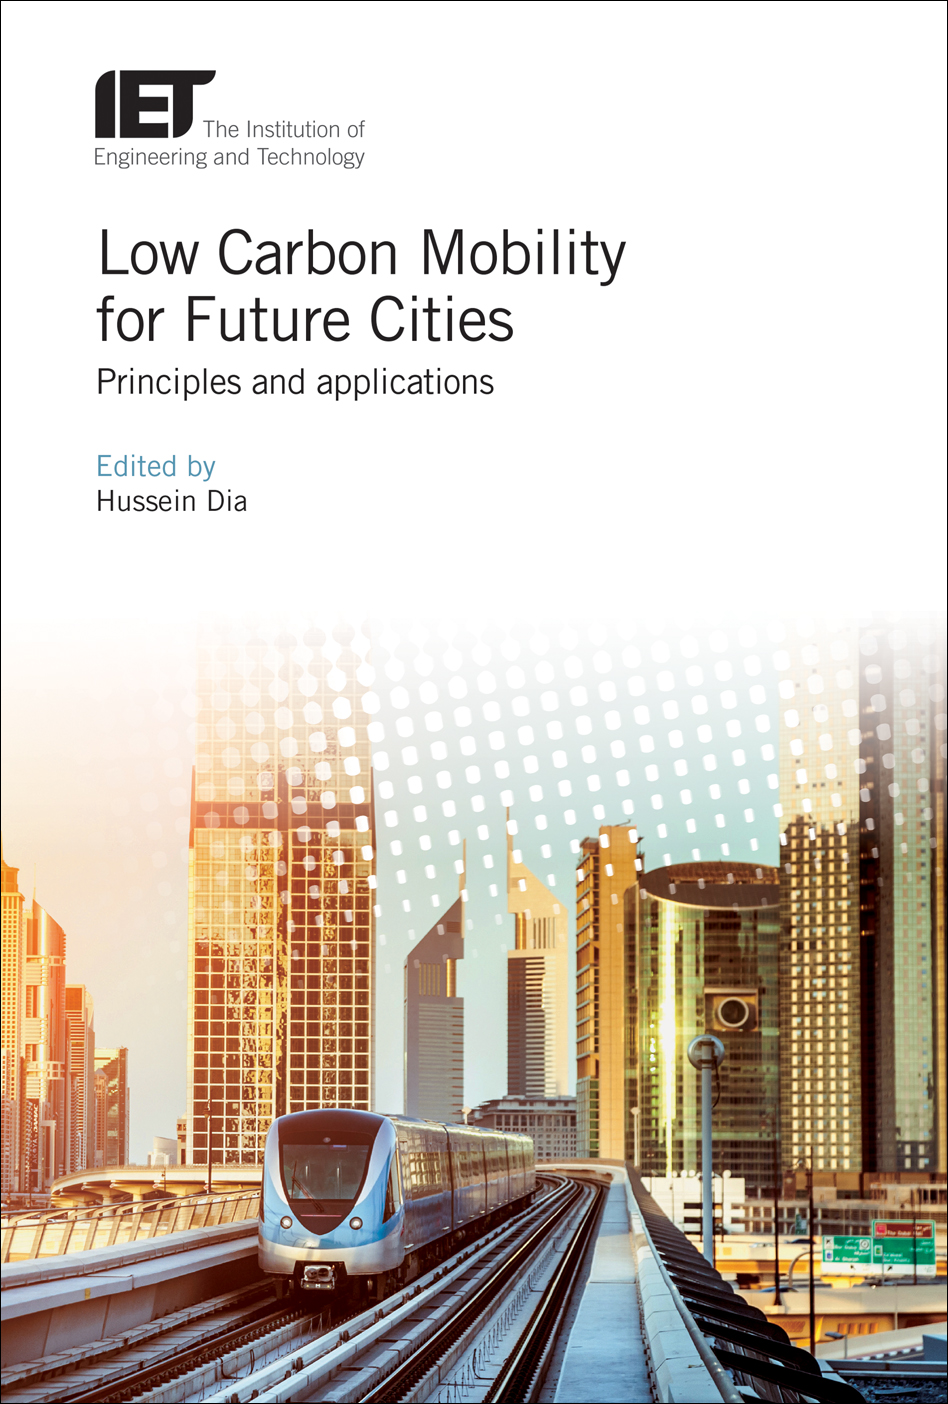 Low Carbon Mobility for Future Cities, Principles and applications